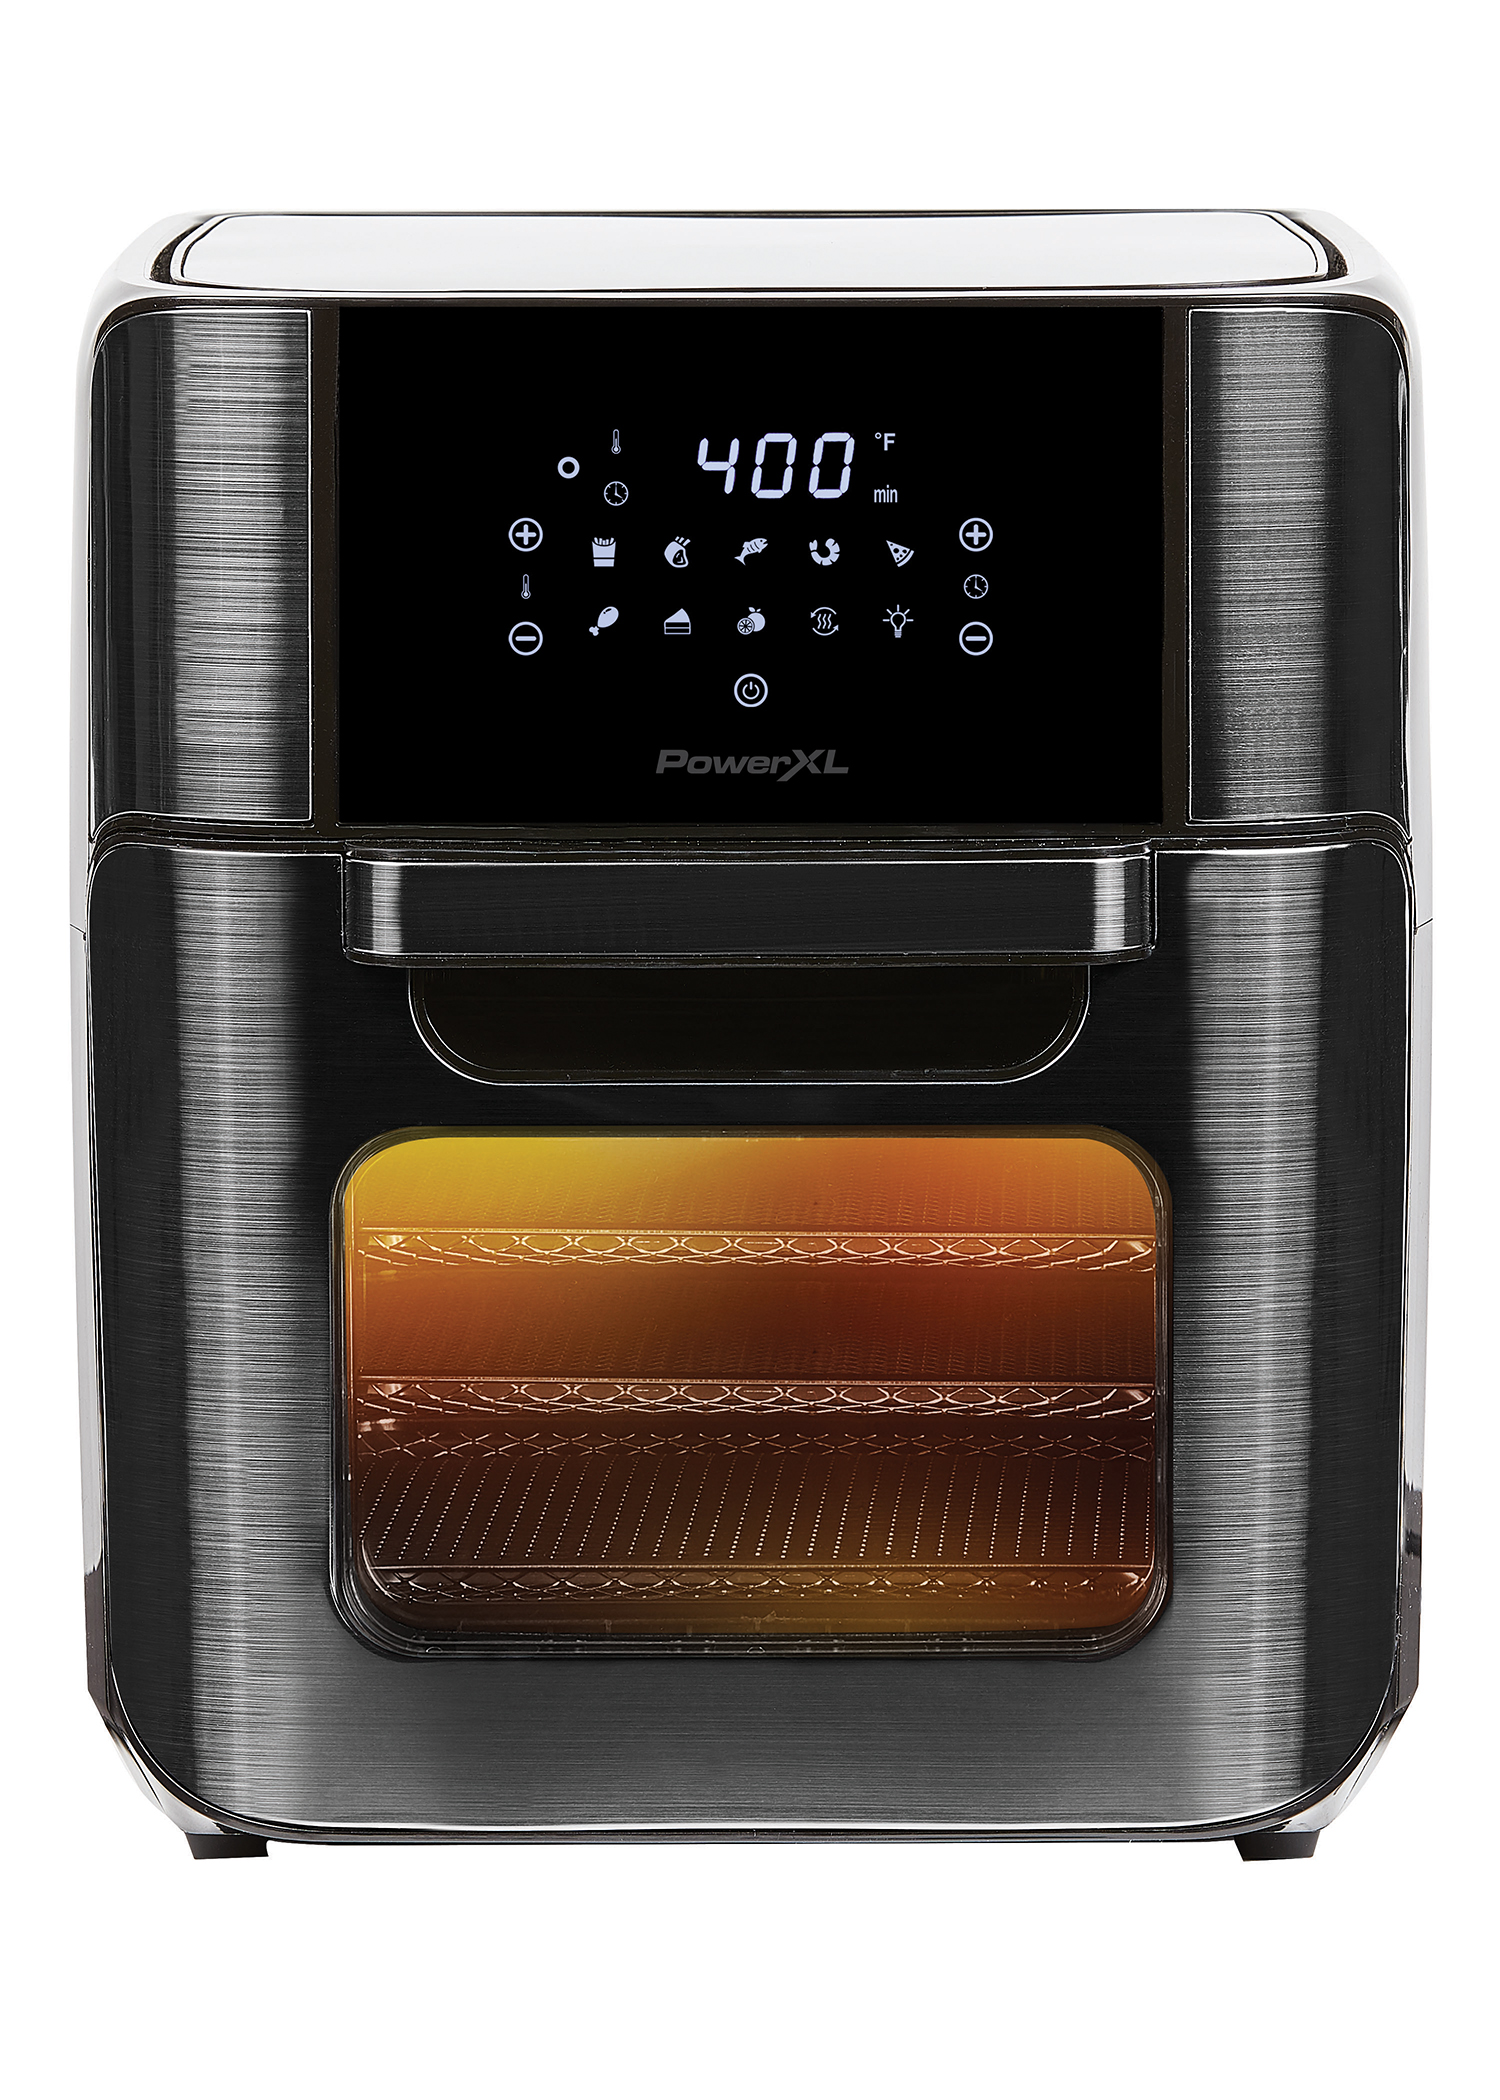 PowerXL Air Fryer Home Pro, 12 Quart, Black Stainless Steel, 1700 Watts - image 2 of 8